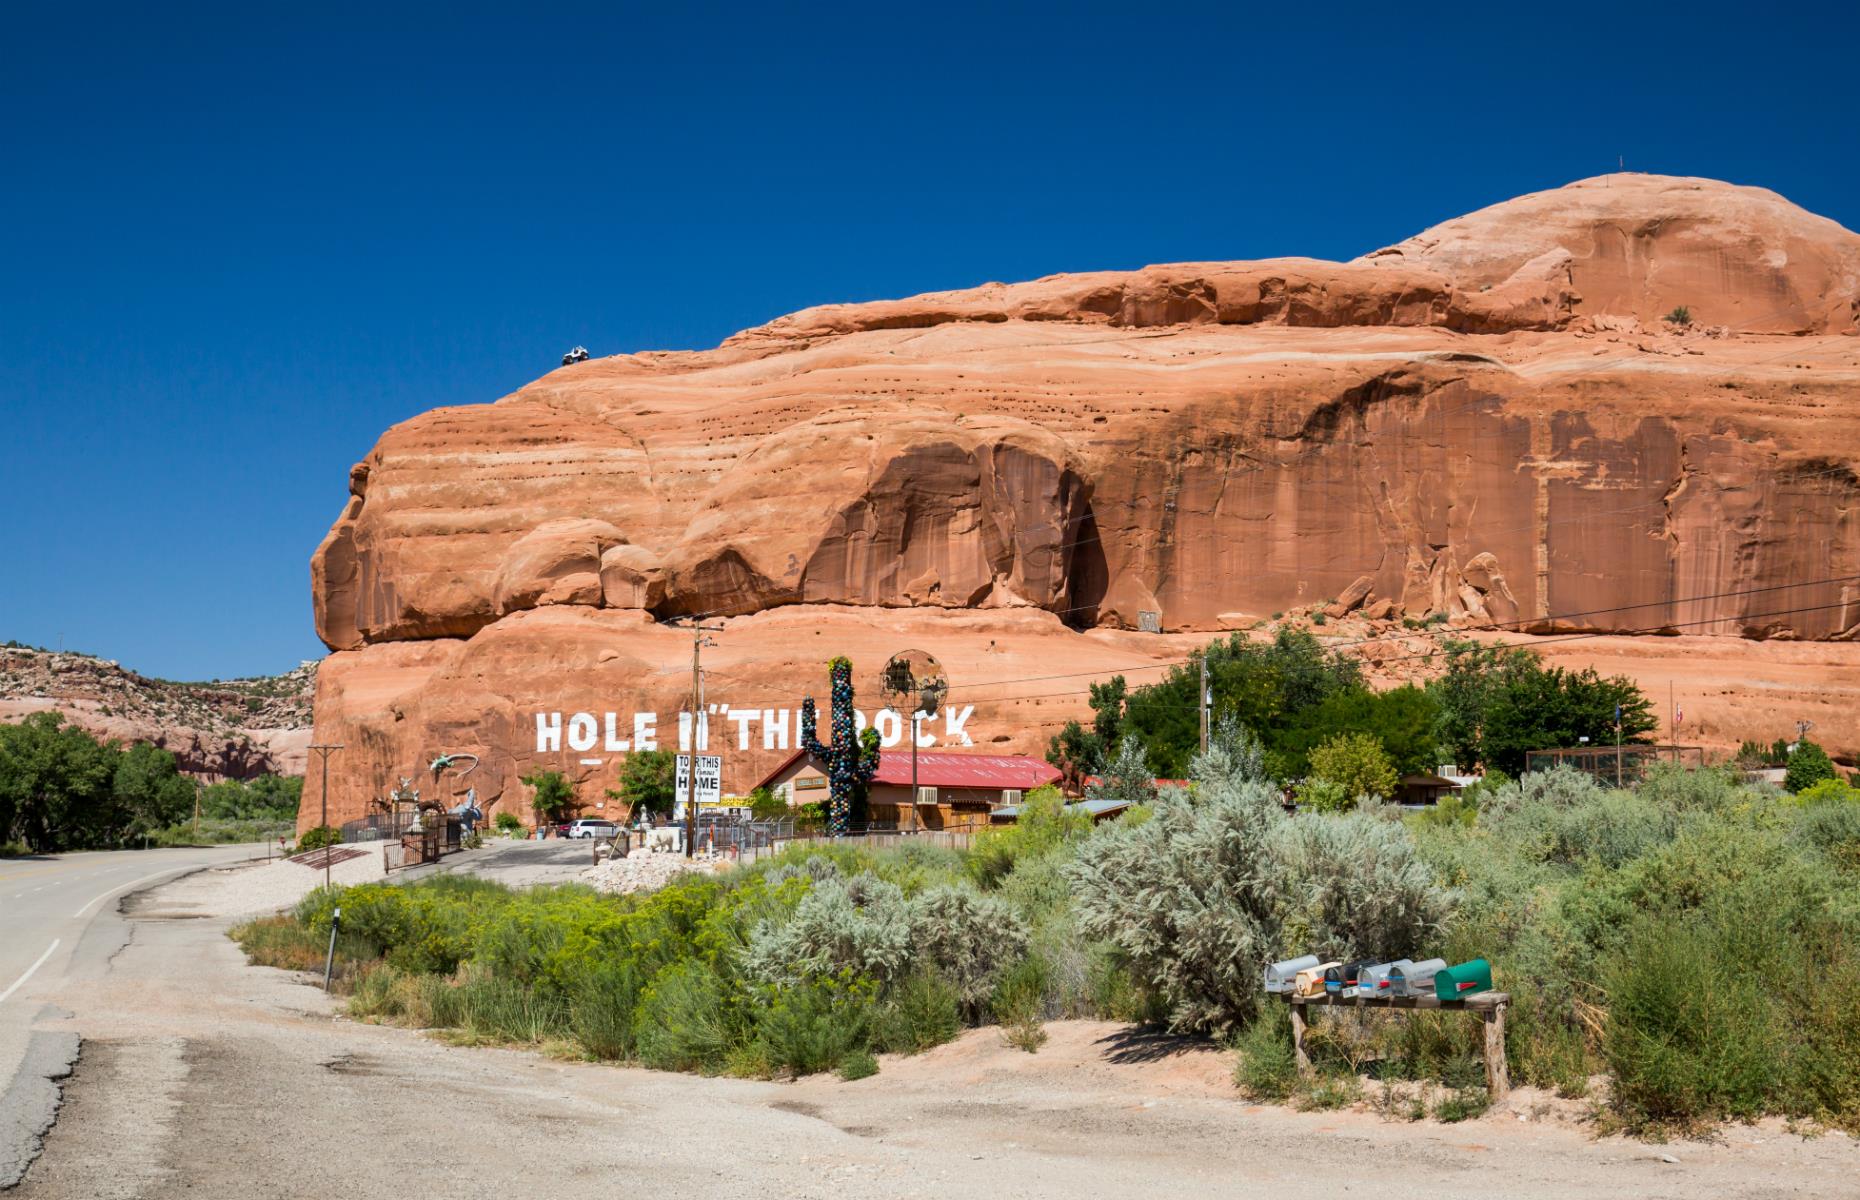 <p>Carved out of a massive rock on US Highway 191, <a href="http://theholeintherock.com/">this unusual structure</a> started life in the 1940s as a small alcove for the owners’ kids to sleep in. It gradually expanded into a 5,000-square-foot (464sq km) home with 14 rooms. The unusual ‘house’ is usually open for tours so people can see how the Christensen family once lived. Things get even more bizarre with an on-site zoo, roamed by zebra, camels and bison.</p>